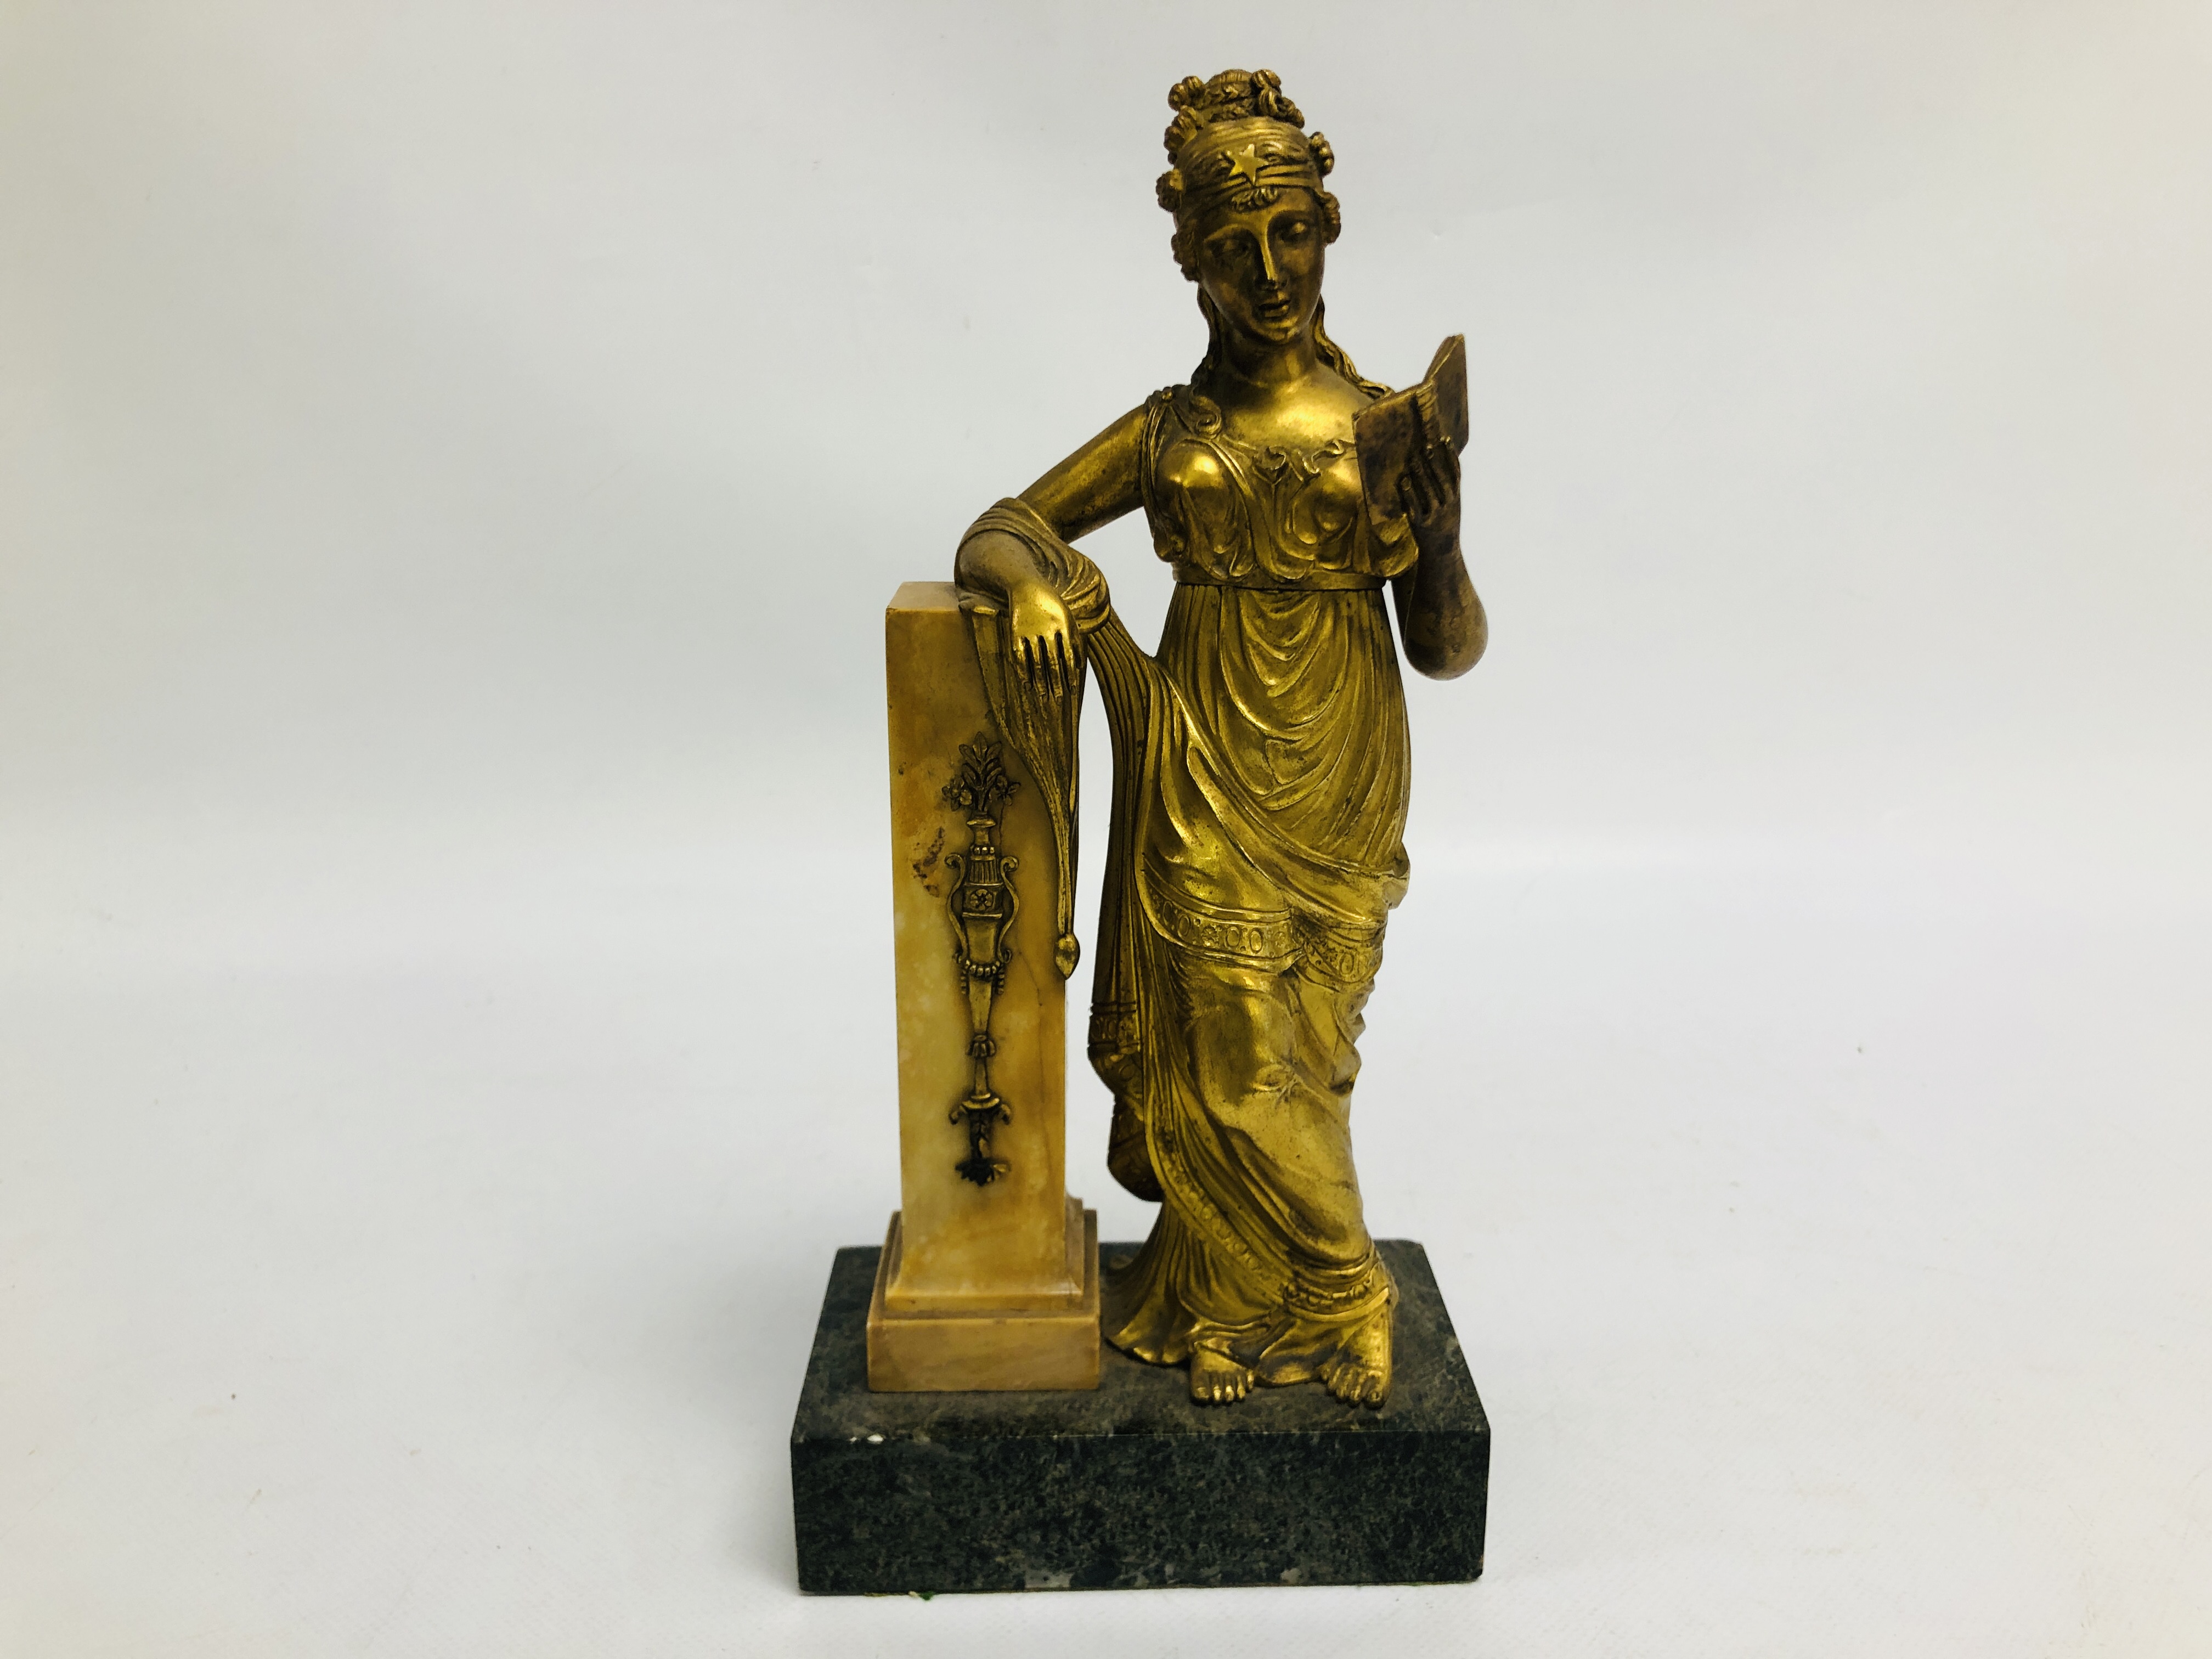 A BELLE EPOQUE GILT BRONZE FIGURE OF A STANDING WOMAN IN CLASSICAL DRESS, READING FROM A BOOK,